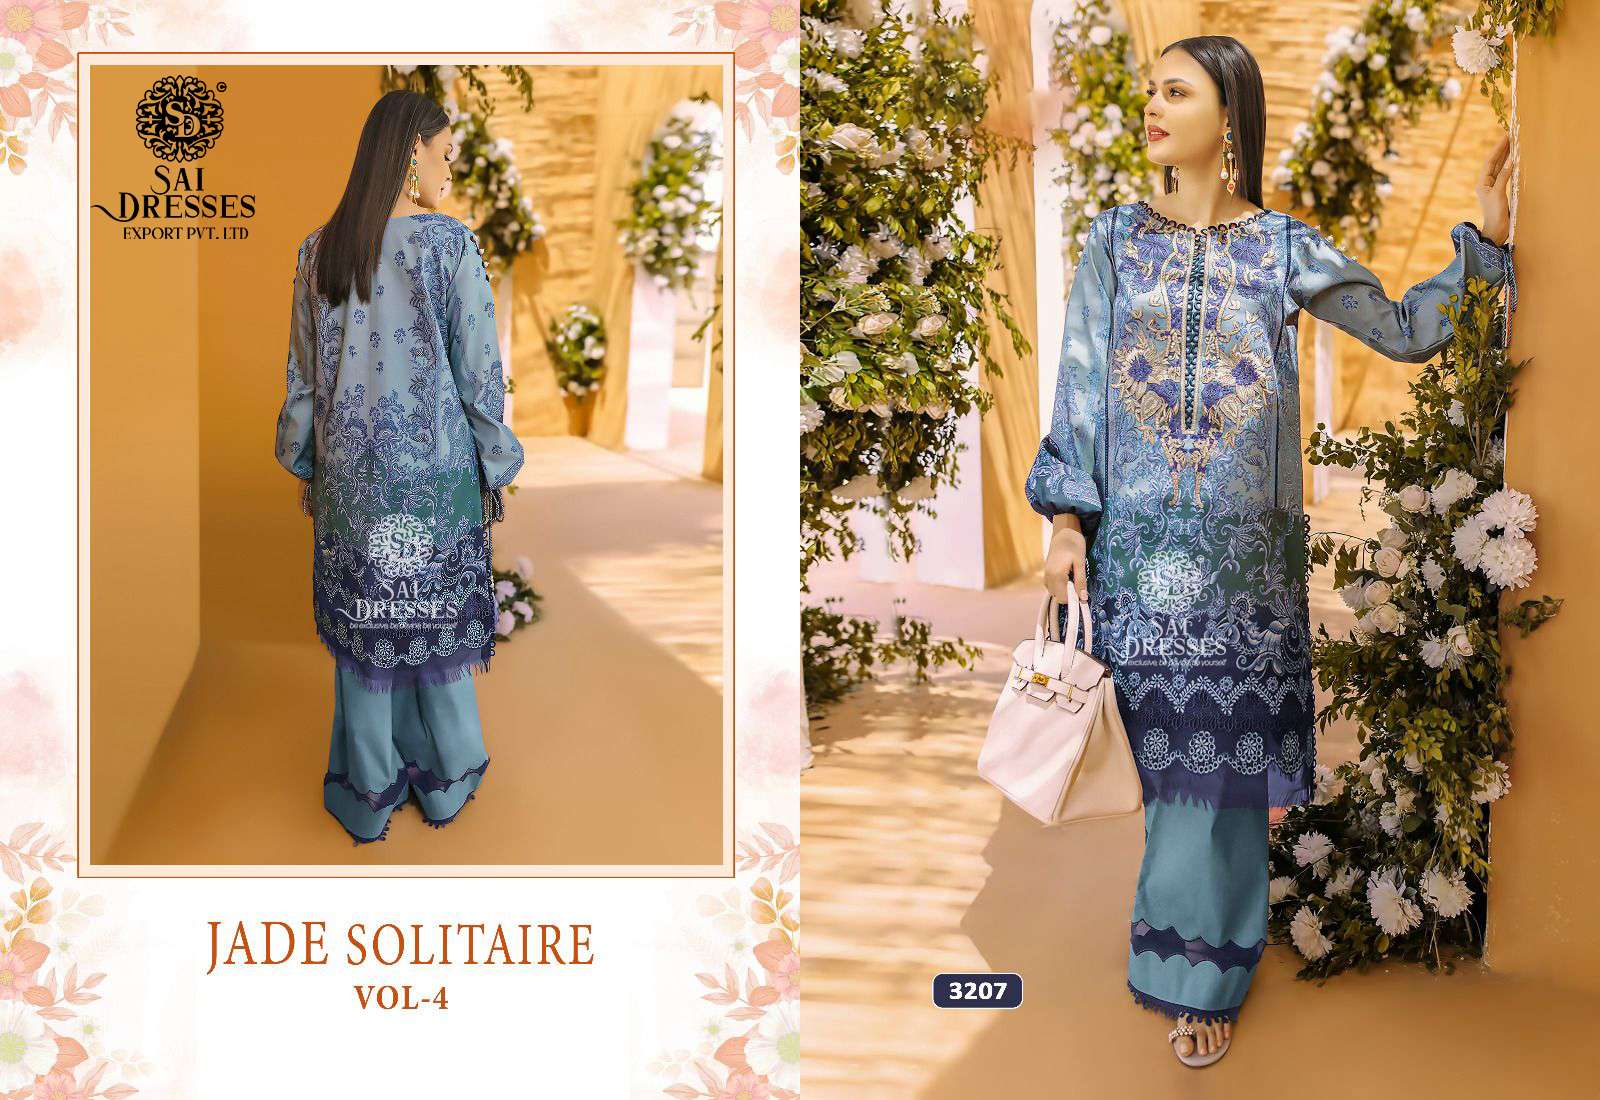 SAI DRESSES PRESENT JADE SOLITAIRE VOL 4 PURE COTTON PATCH EMBROIDERED FANCY PAKISTANI SALWAR SUITS IN WHOLESALE RATE IN SURAT